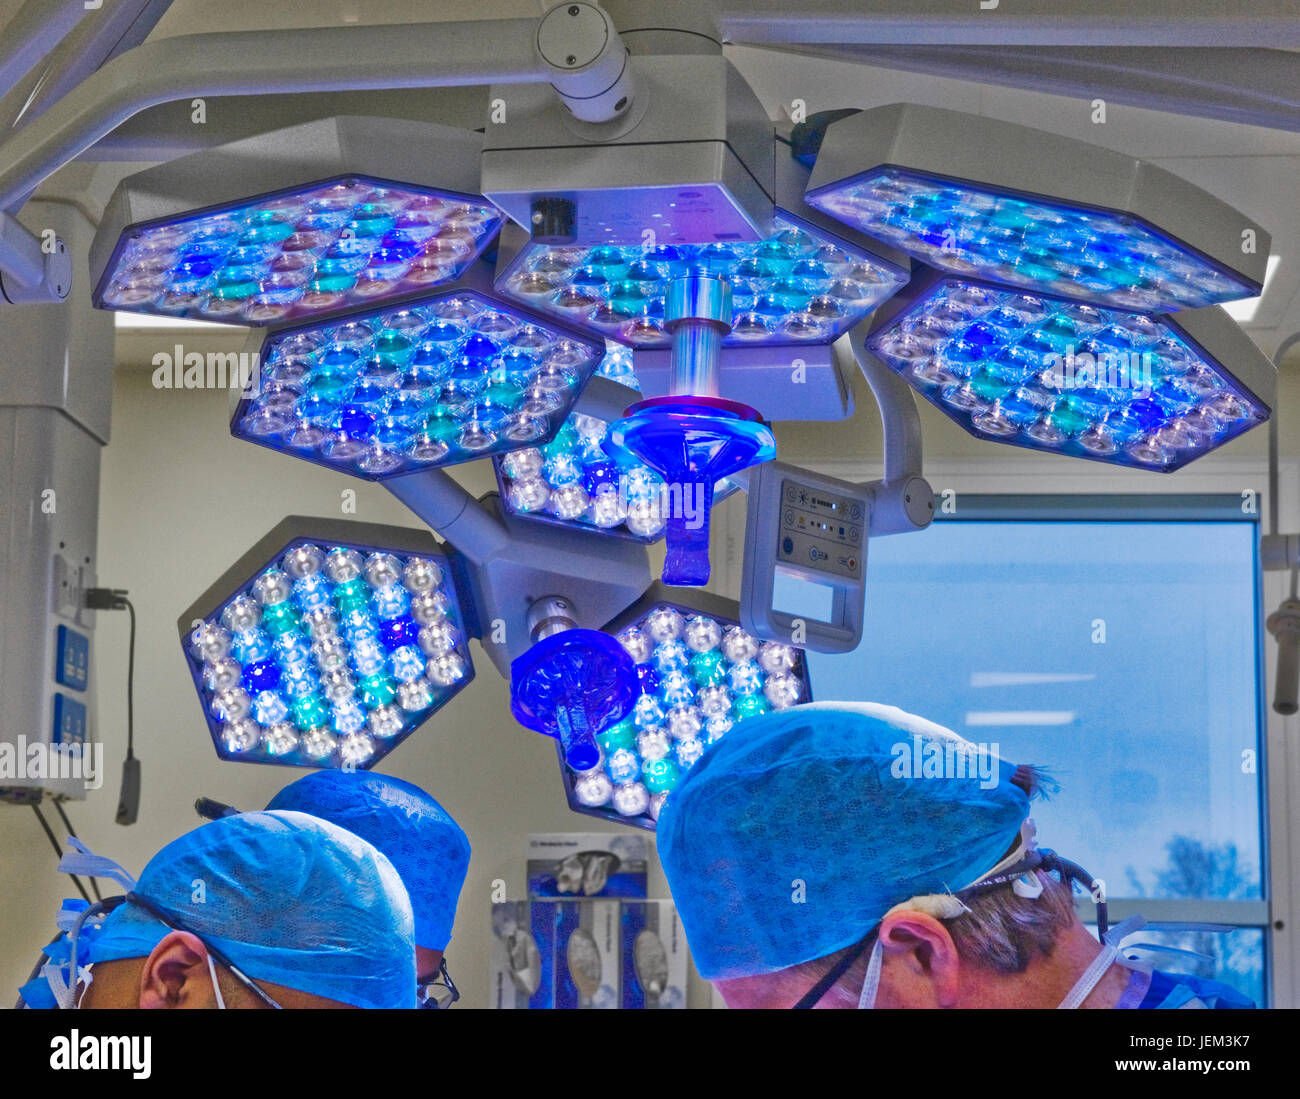 Surgical team work using cool directional lighting Stock Photo